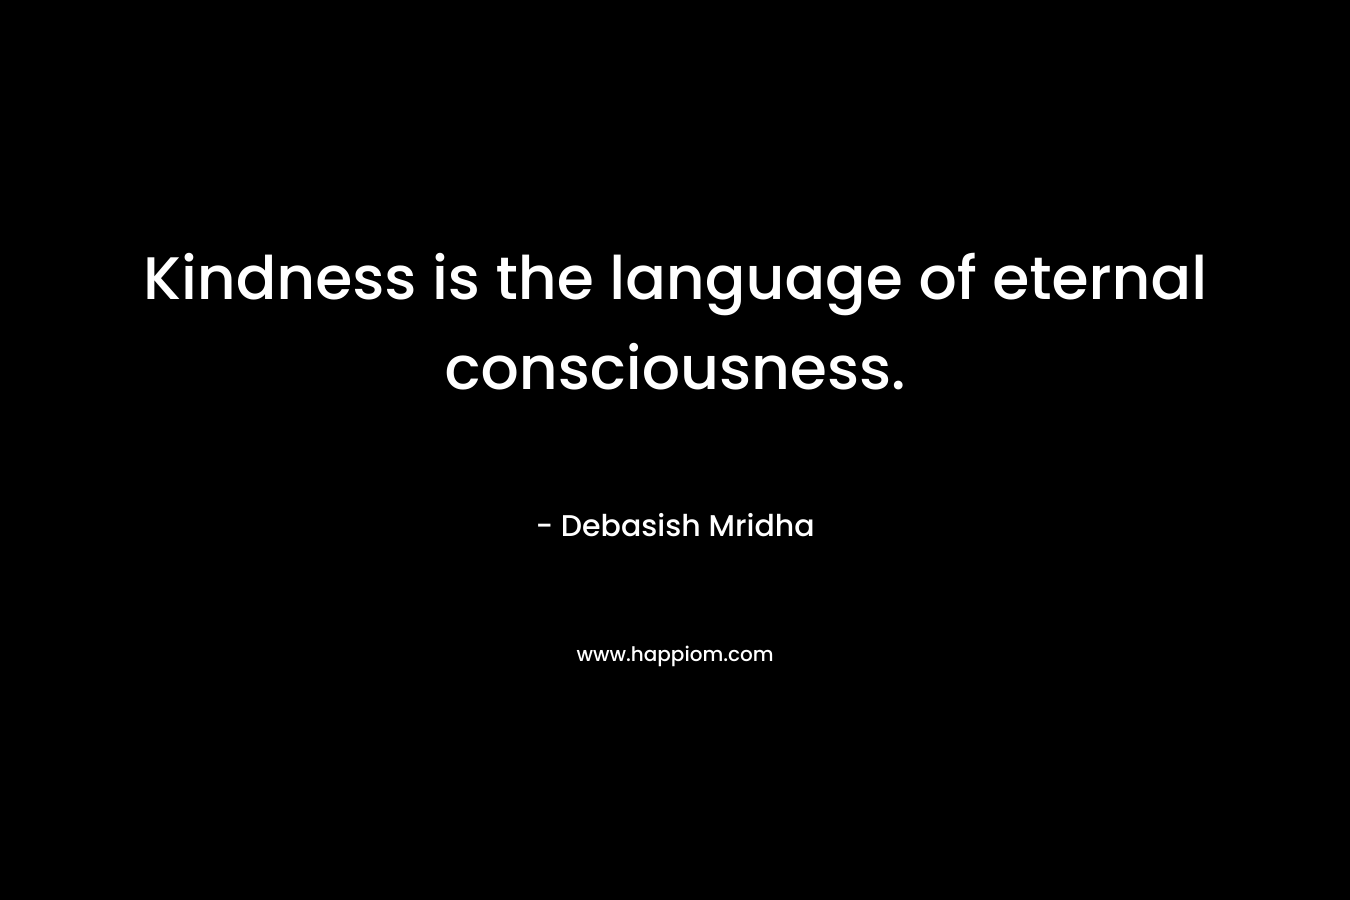 Kindness is the language of eternal consciousness.